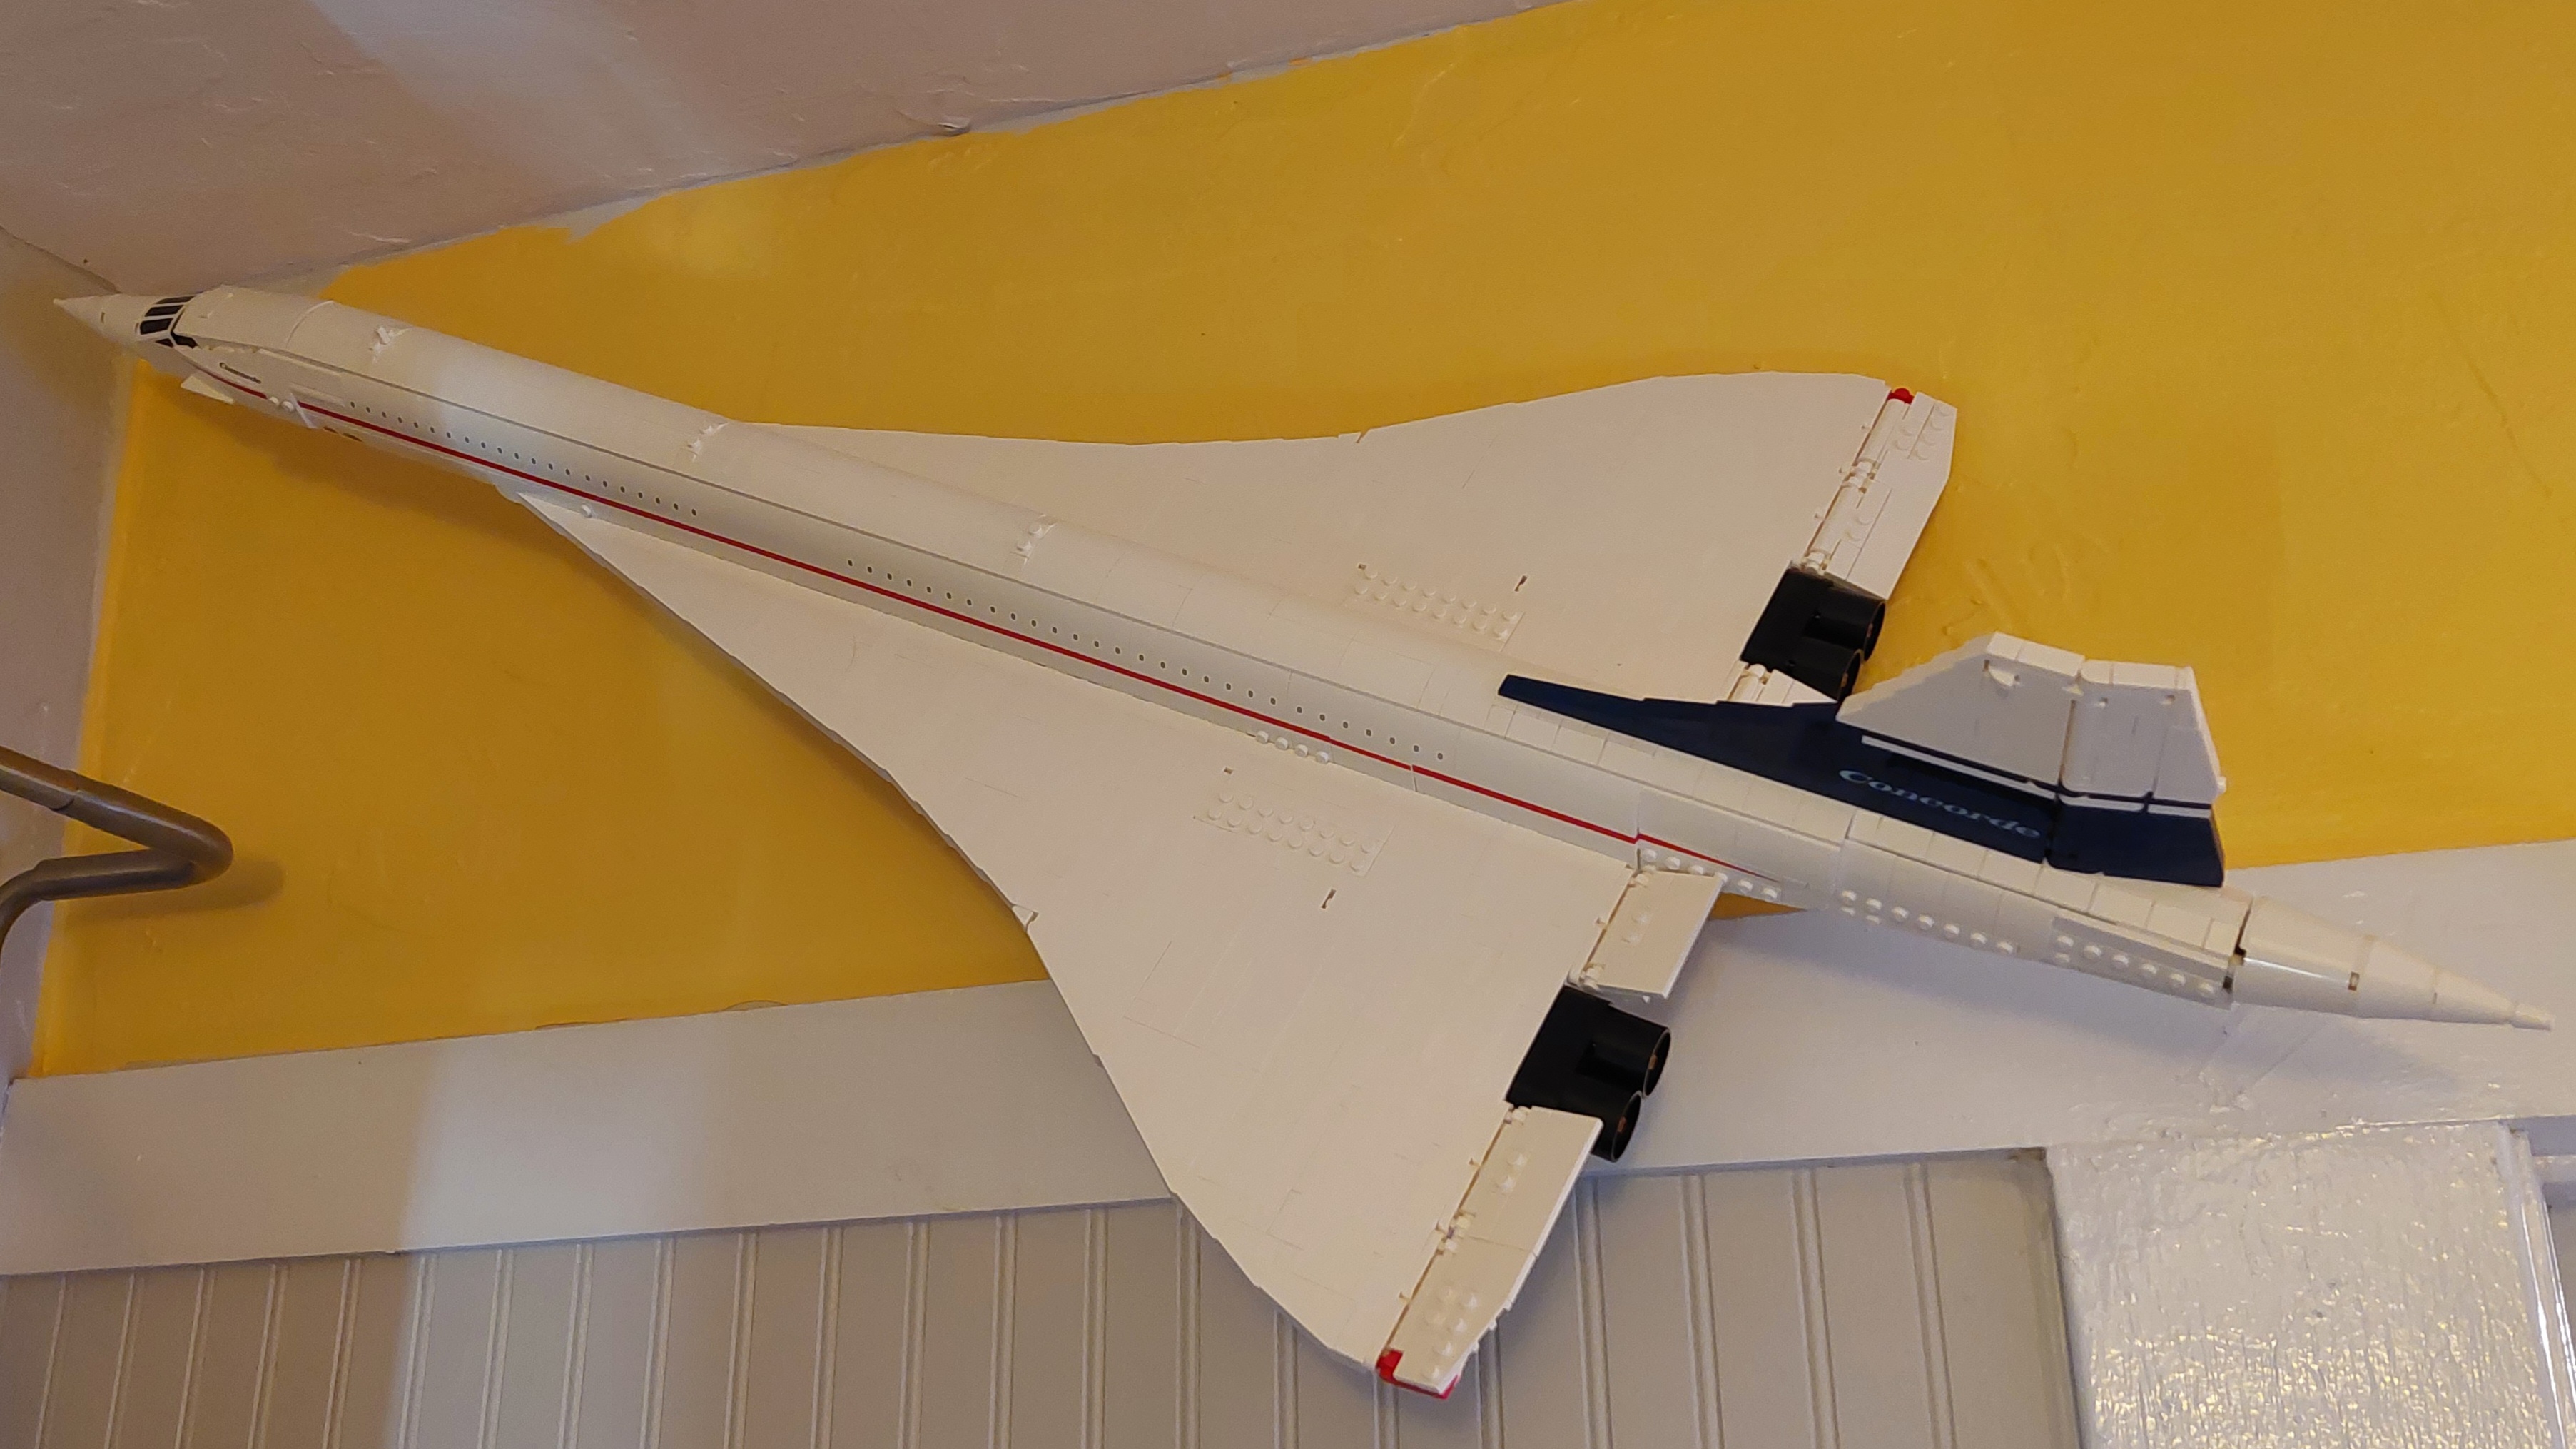 LEGO Concorde - Angled Wall Mount by Sam M